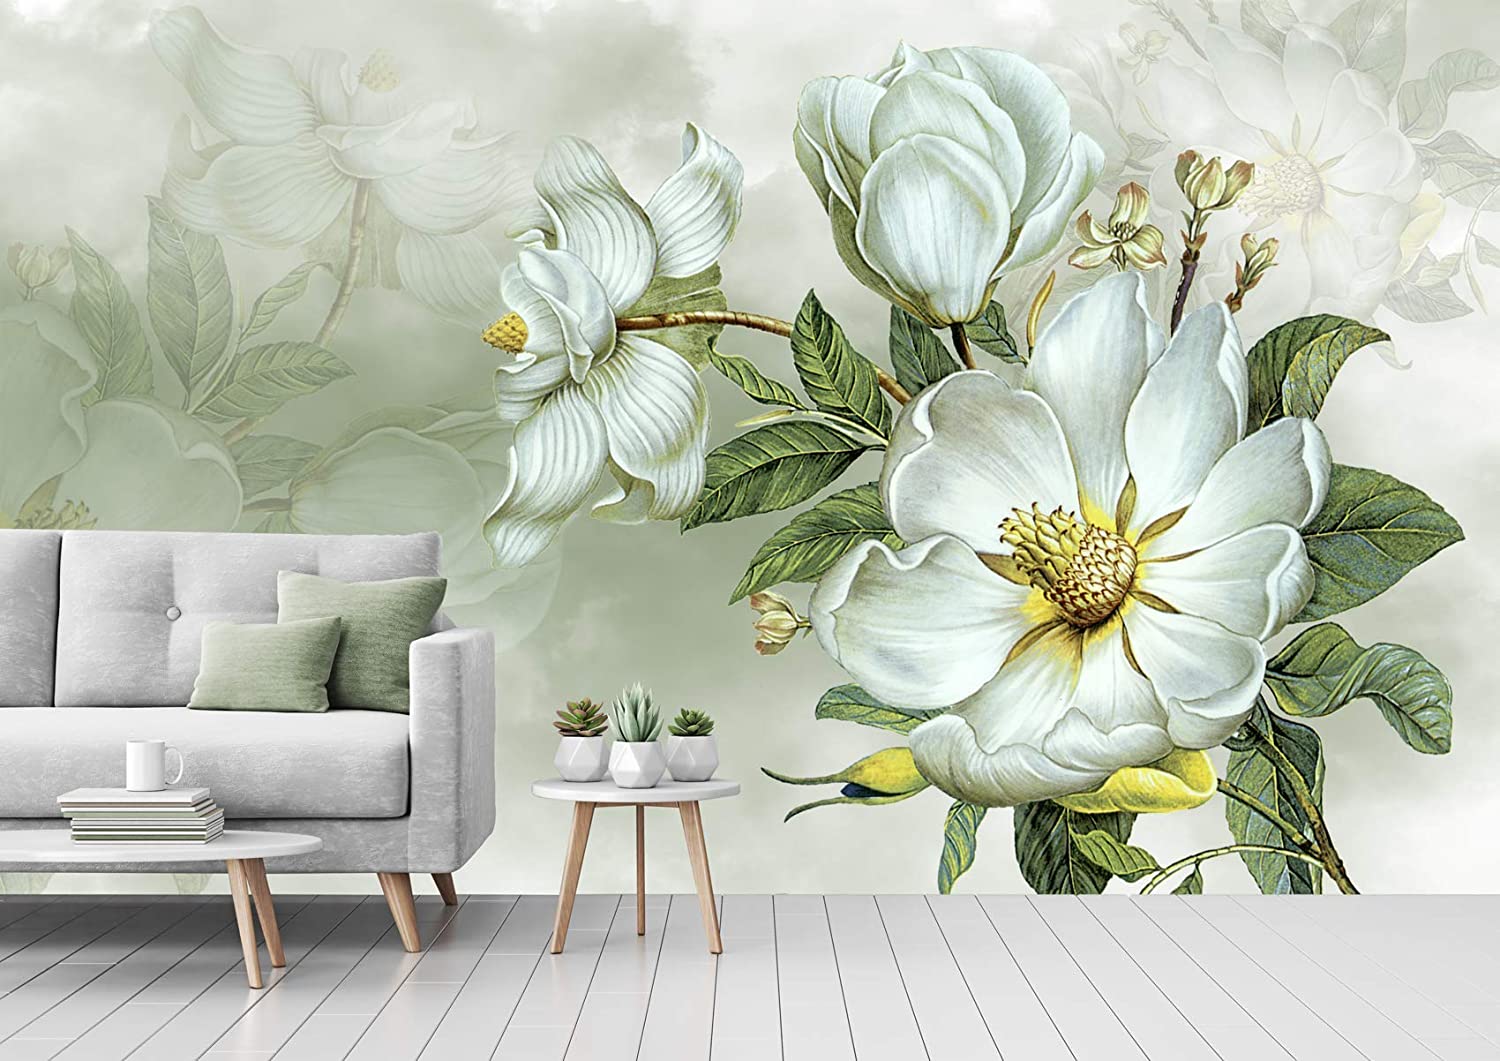 Bohemian Floral Wallpapers Most Popular Bohemian Floral Wallpapers